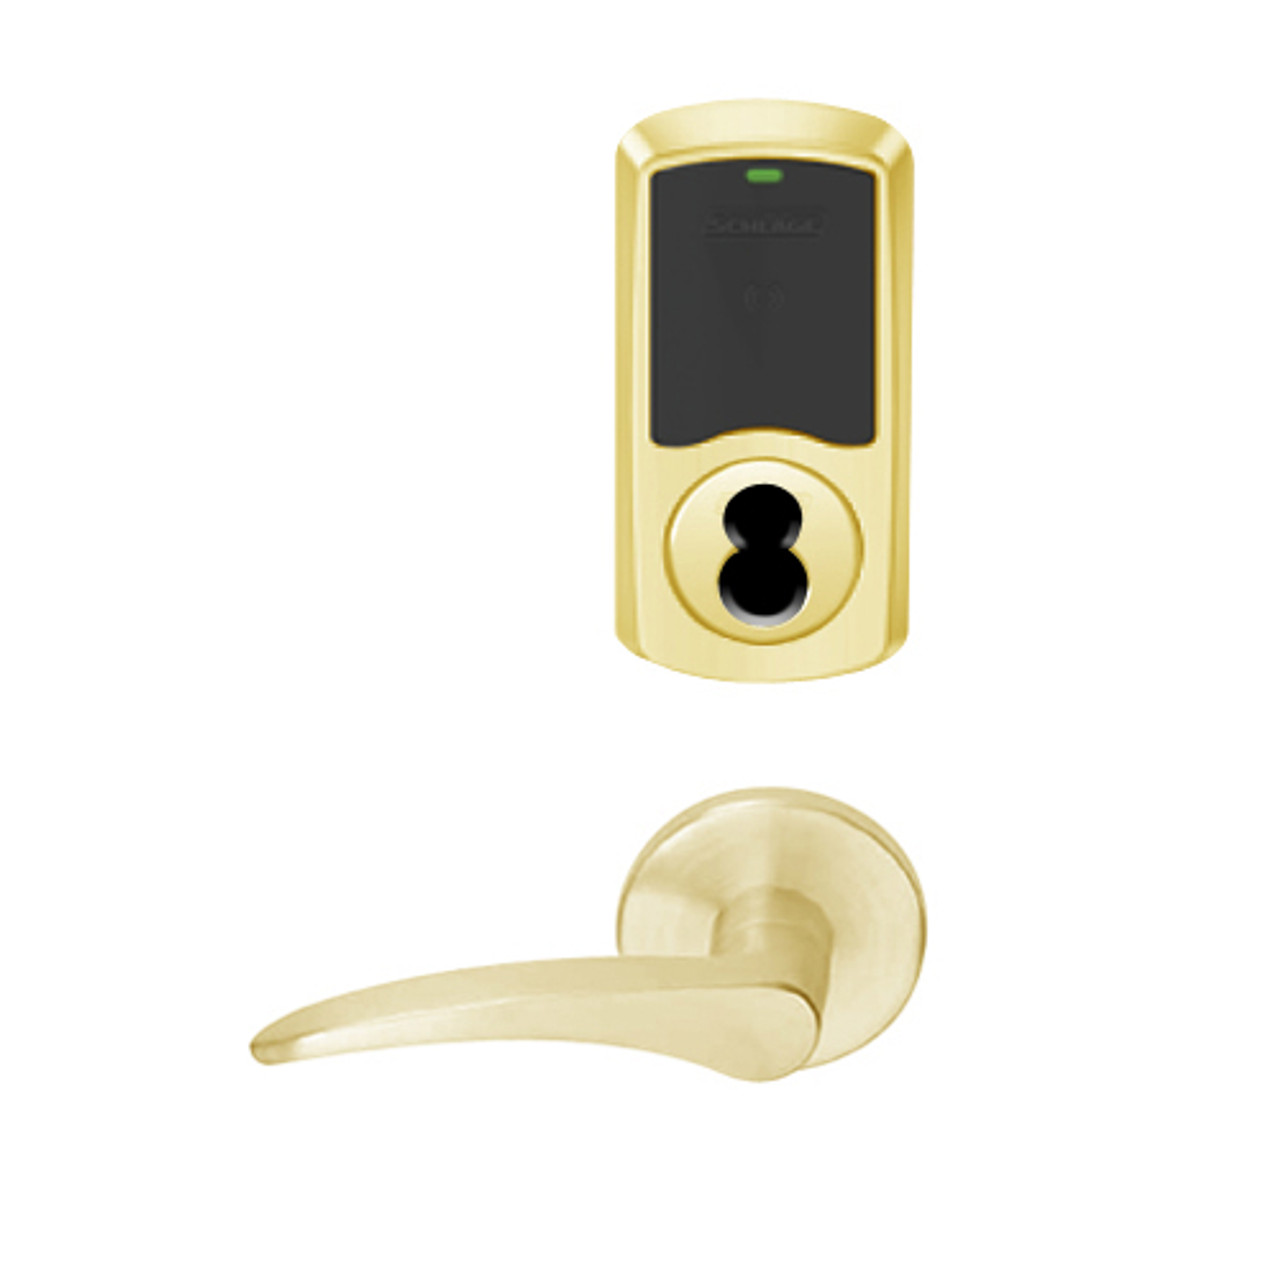 LEMS-GRW-BD-12-605-00A-LH Schlage Storeroom Wireless Greenwich Mortise Lock with LED Indicator and 12 Lever Prepped for SFIC in Bright Brass